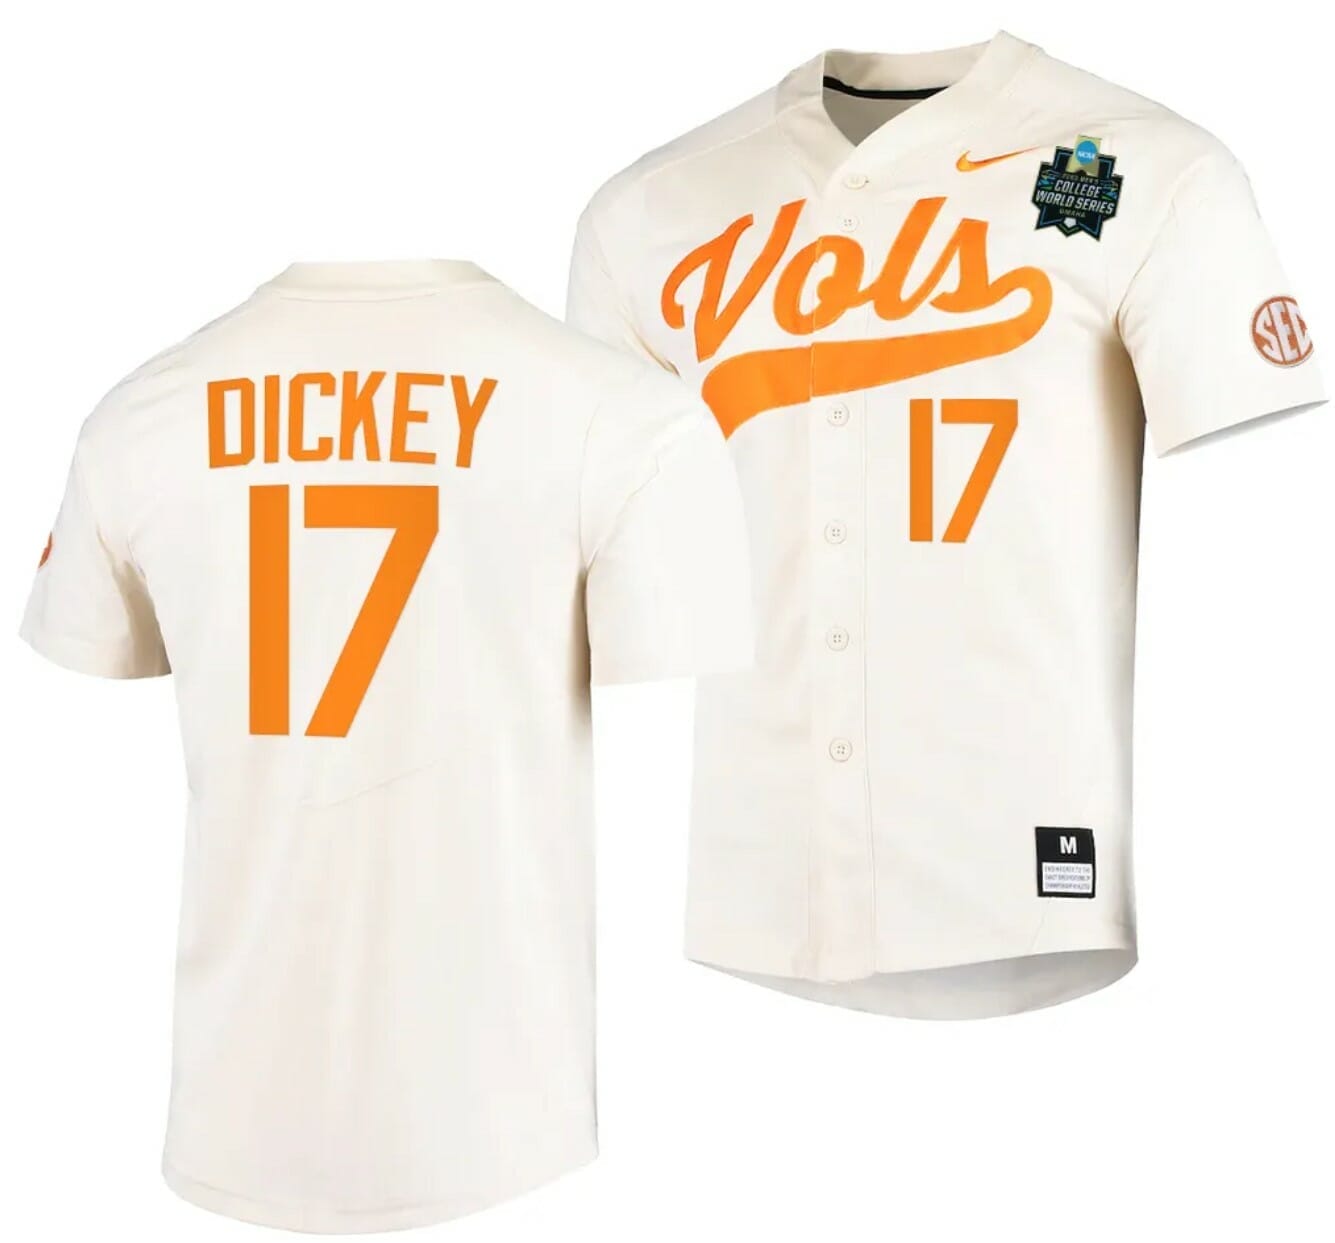 Available] Buy New Tennessee Volunteers Baseball Jersey